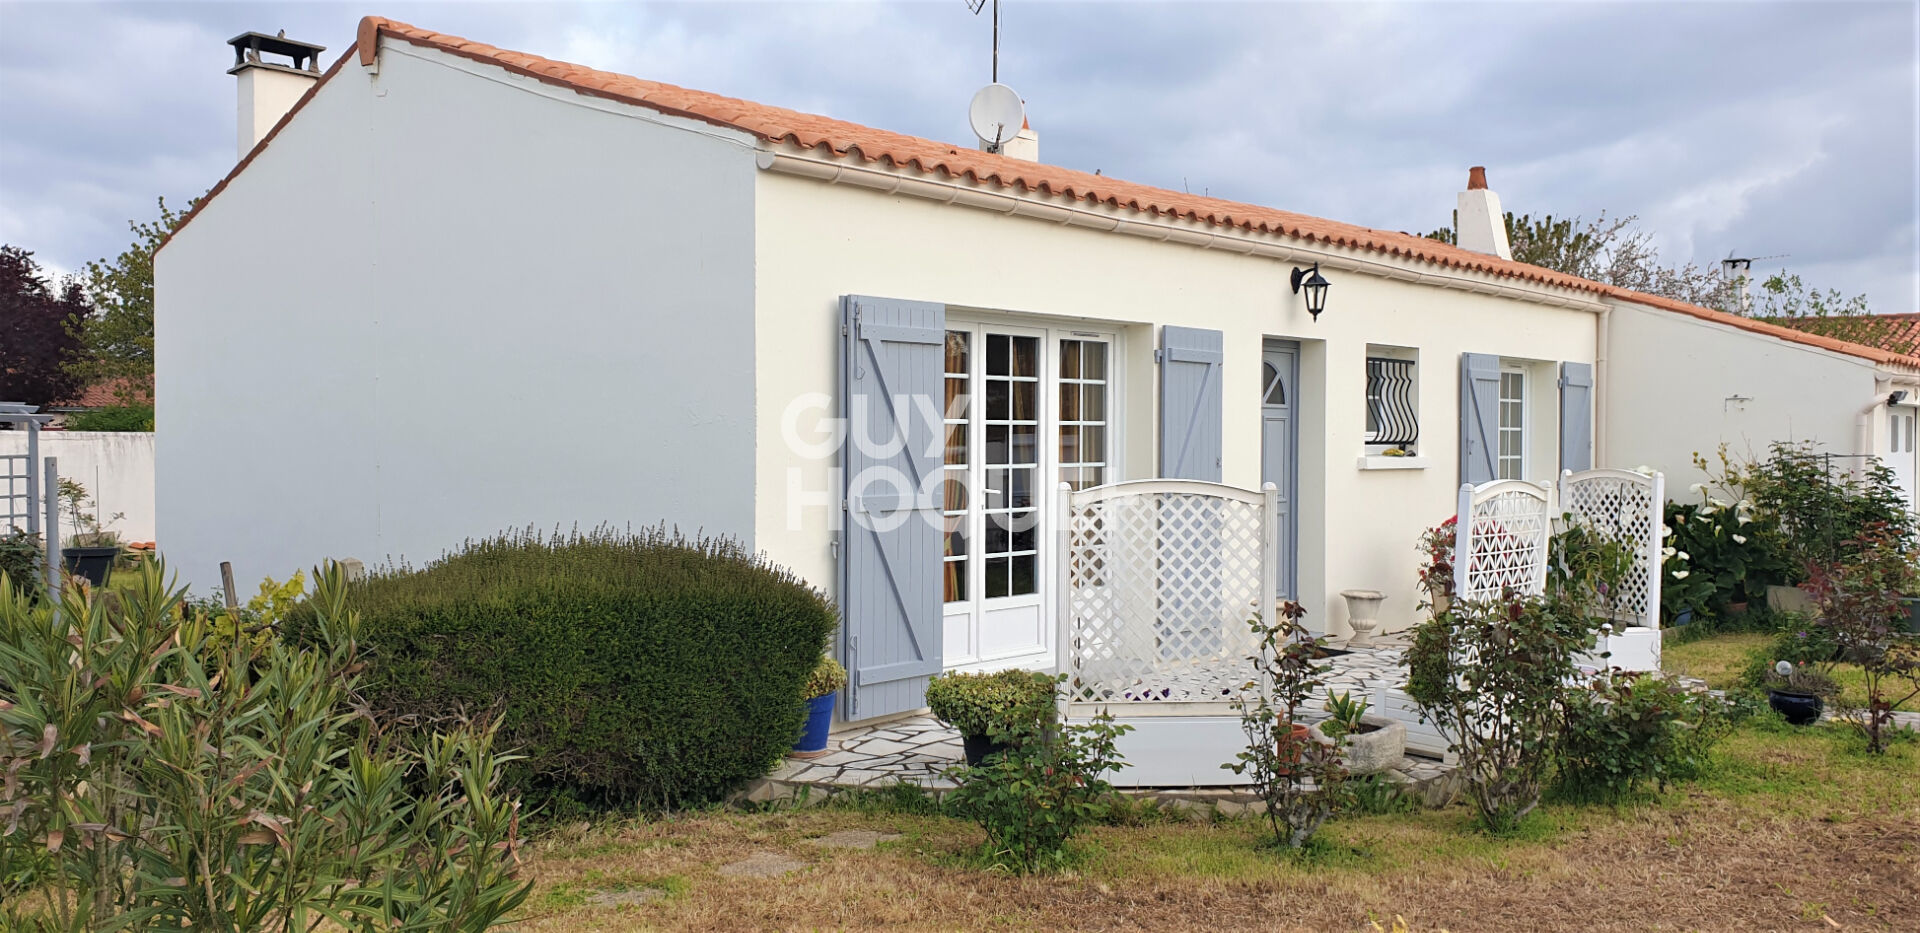 Maison 5 pièces 85 m² Bourgneuf